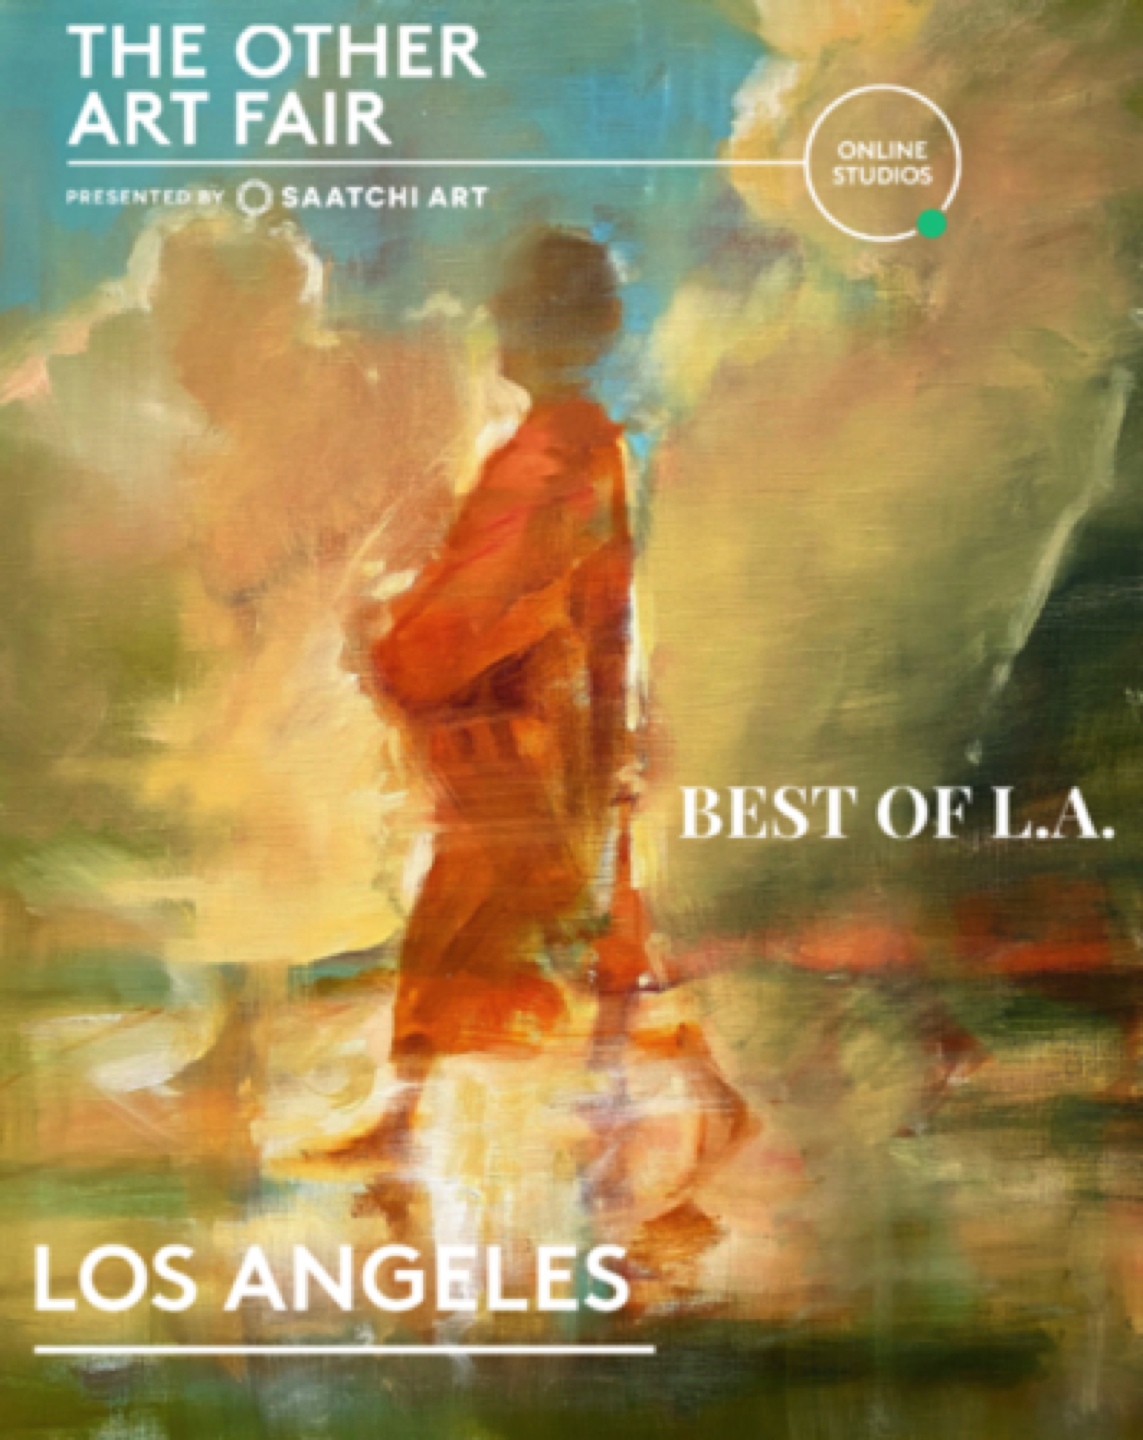 Gregg Chadwick's Steps of Time Chosen by The Other Art Fair as a Best of L.A. - Feb 2021